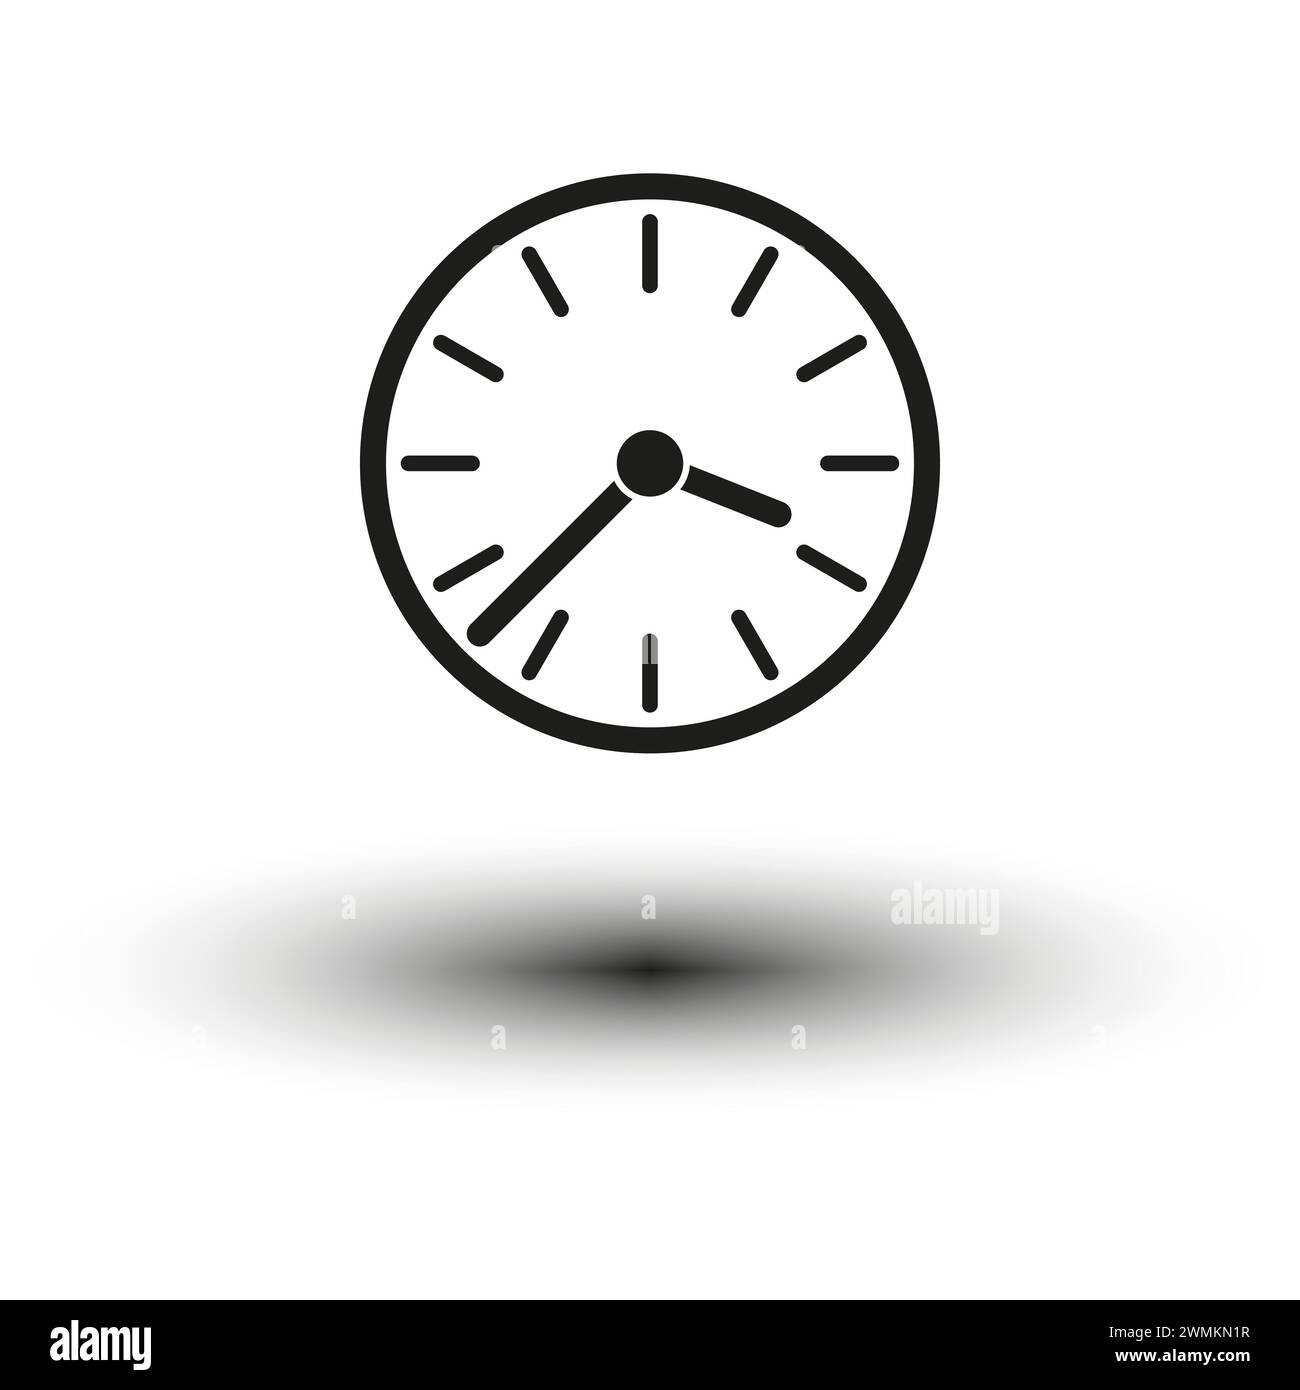 Simple clock icon. Time concept. Minimalist style. Efficient symbol. Vector illustration. EPS 10. Stock Vector